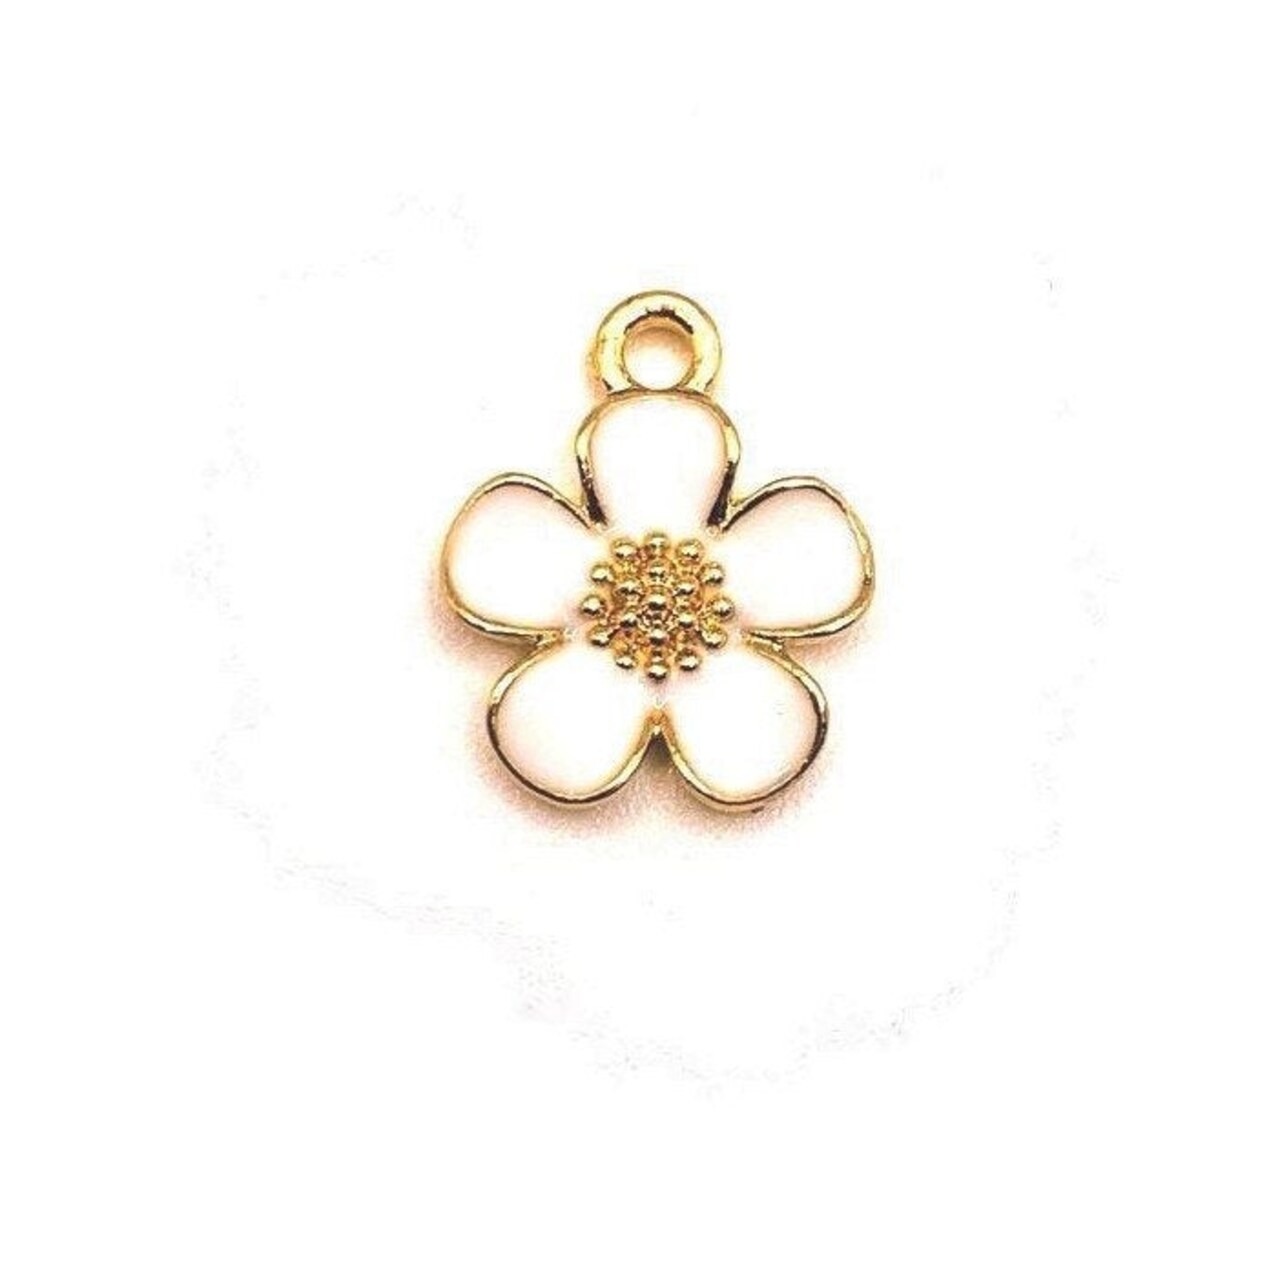 4, 20 or 50 Pieces: White and Gold Flower Charms